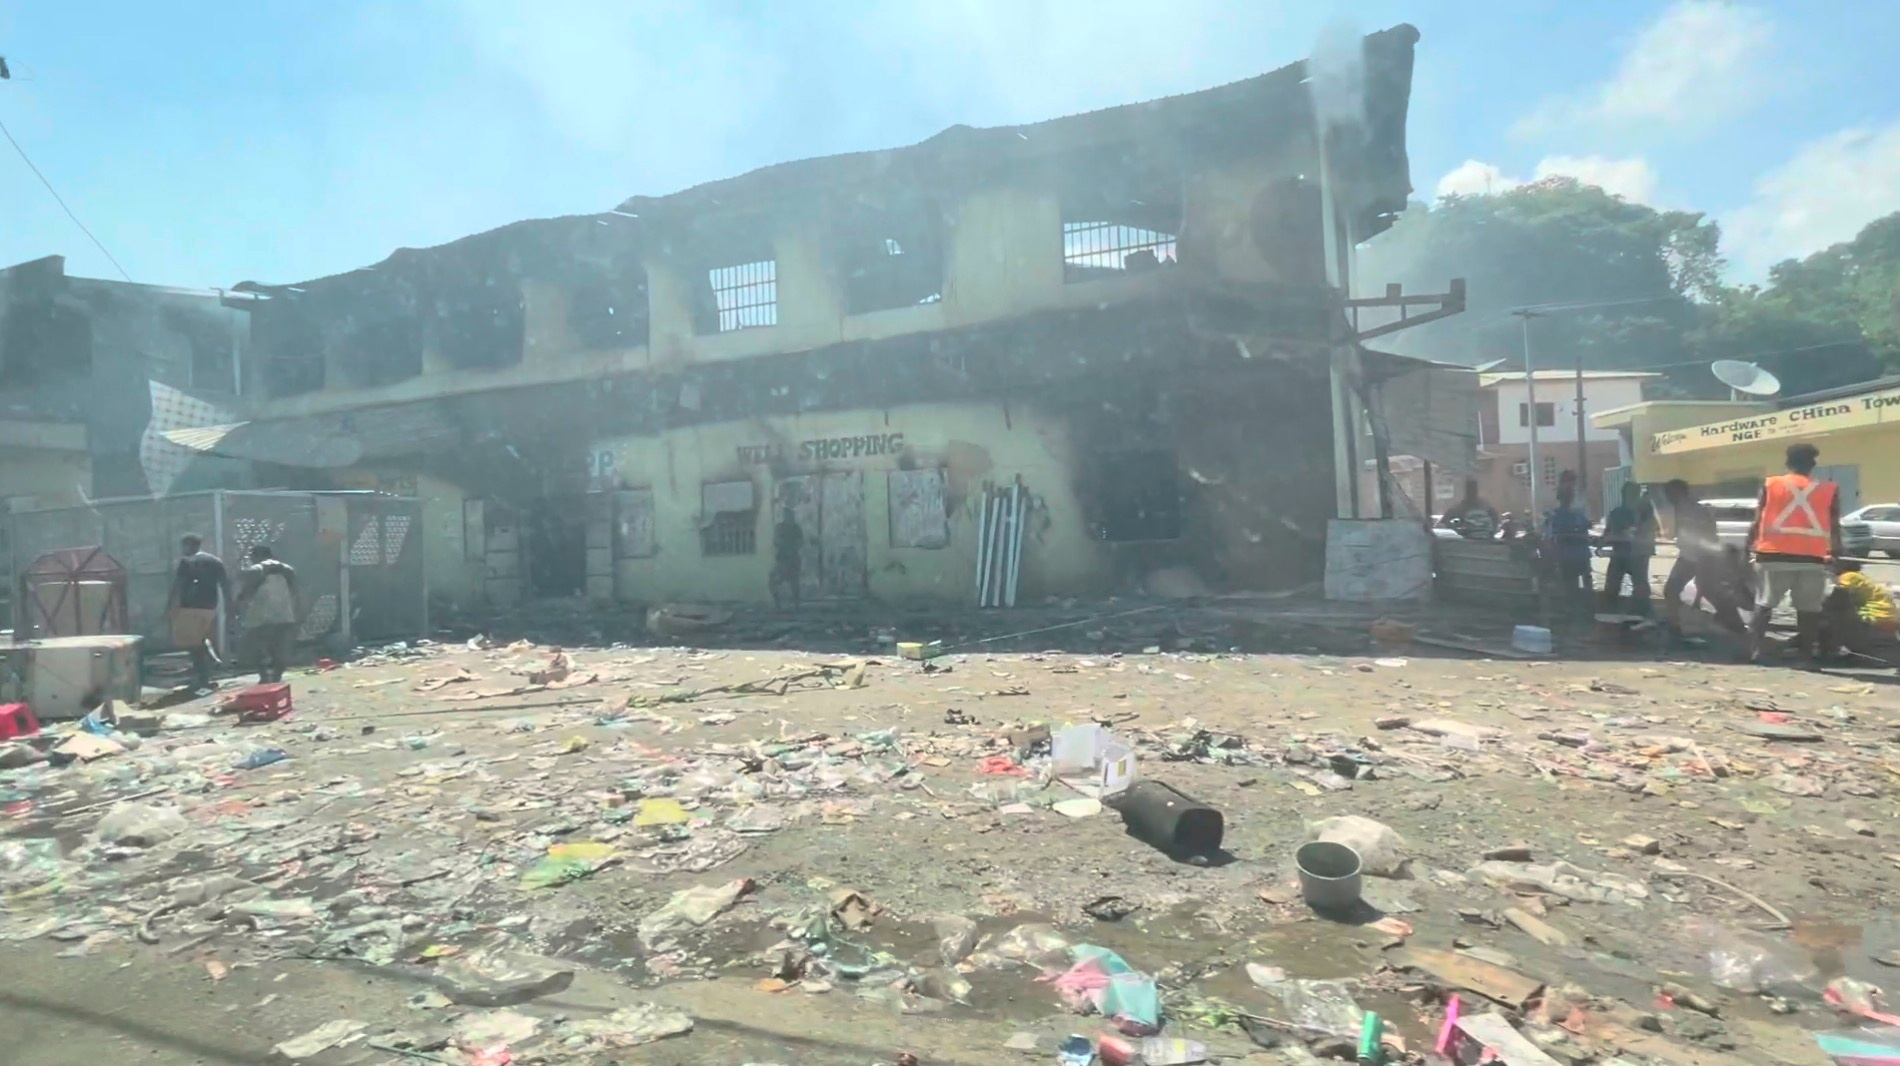 Destroyed building is pictured after days of unrest in Honiara, Solomon Islands November 27, 2021 in this still image obtained from a video. Jone Tuiipelehaki/via REUTERS 